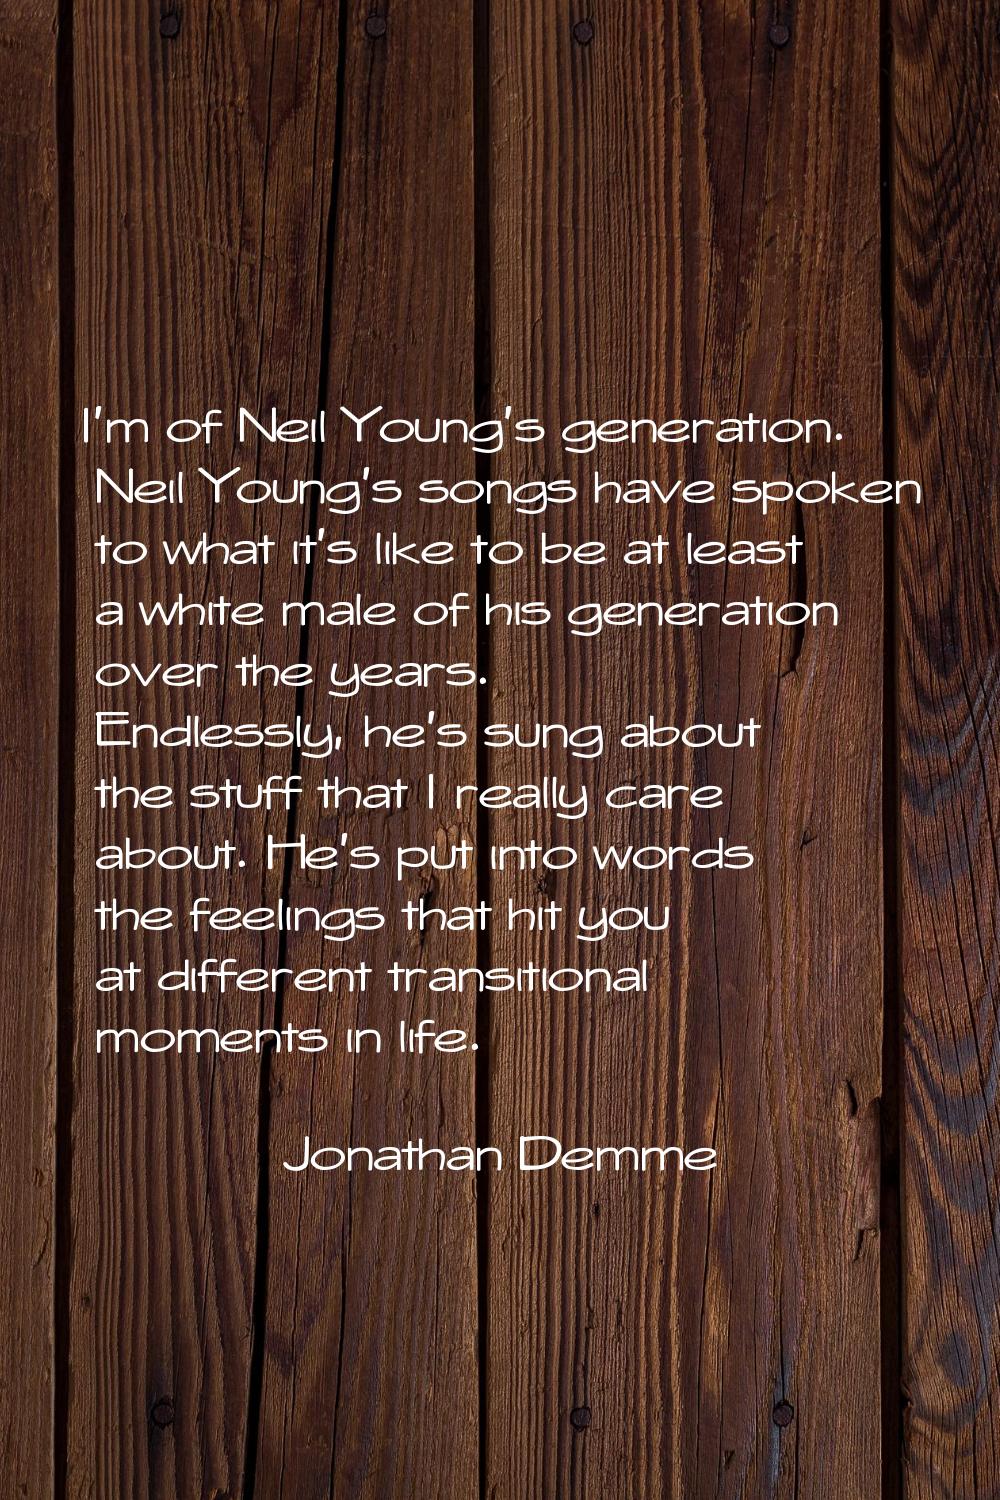 I'm of Neil Young's generation. Neil Young's songs have spoken to what it's like to be at least a w